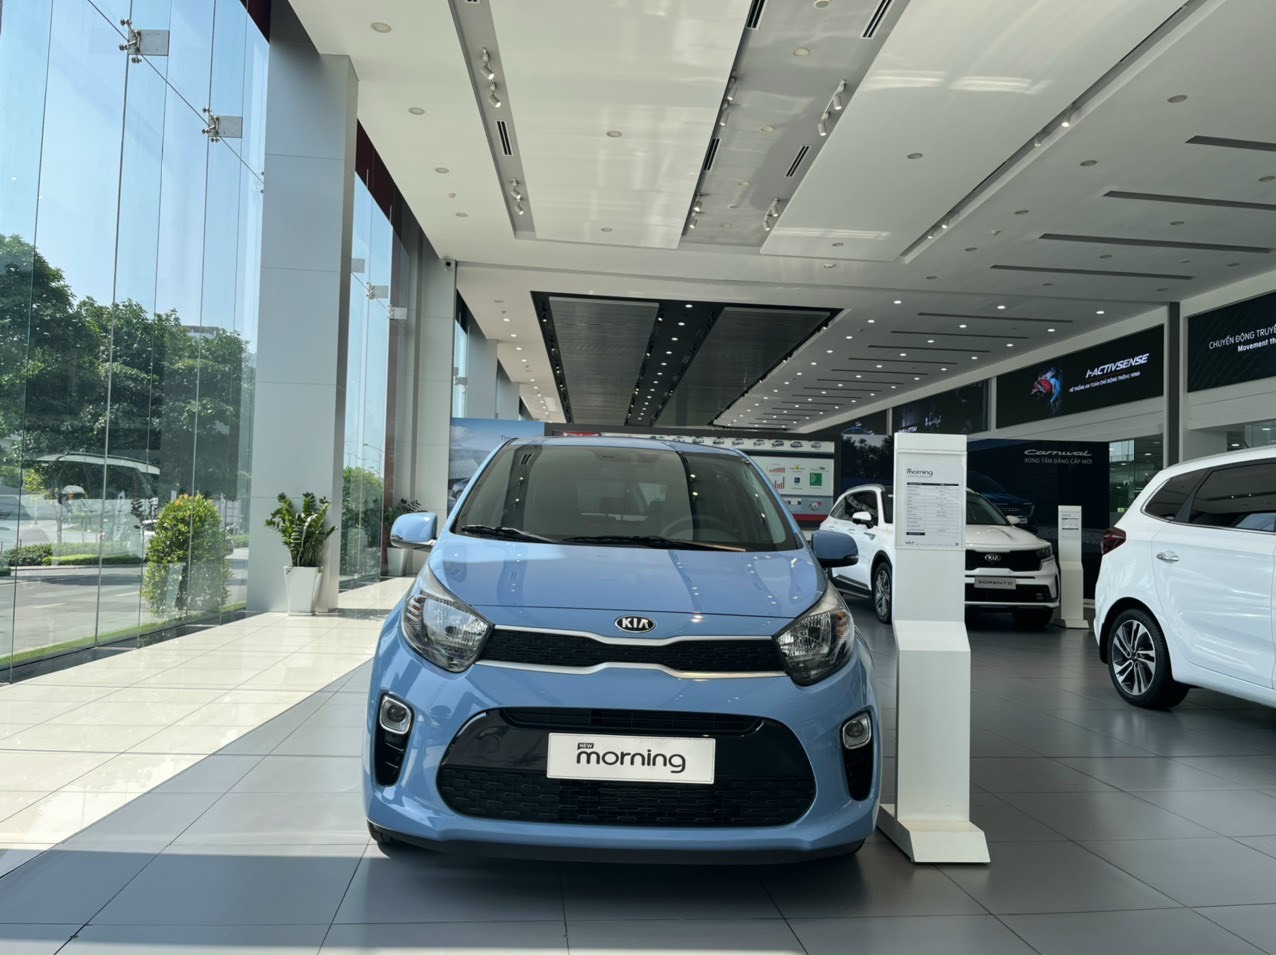 The latest Kia Morning rolling price in early May 2023 is surprisingly cheap, ready to overthrow the Hyundai Grand i10